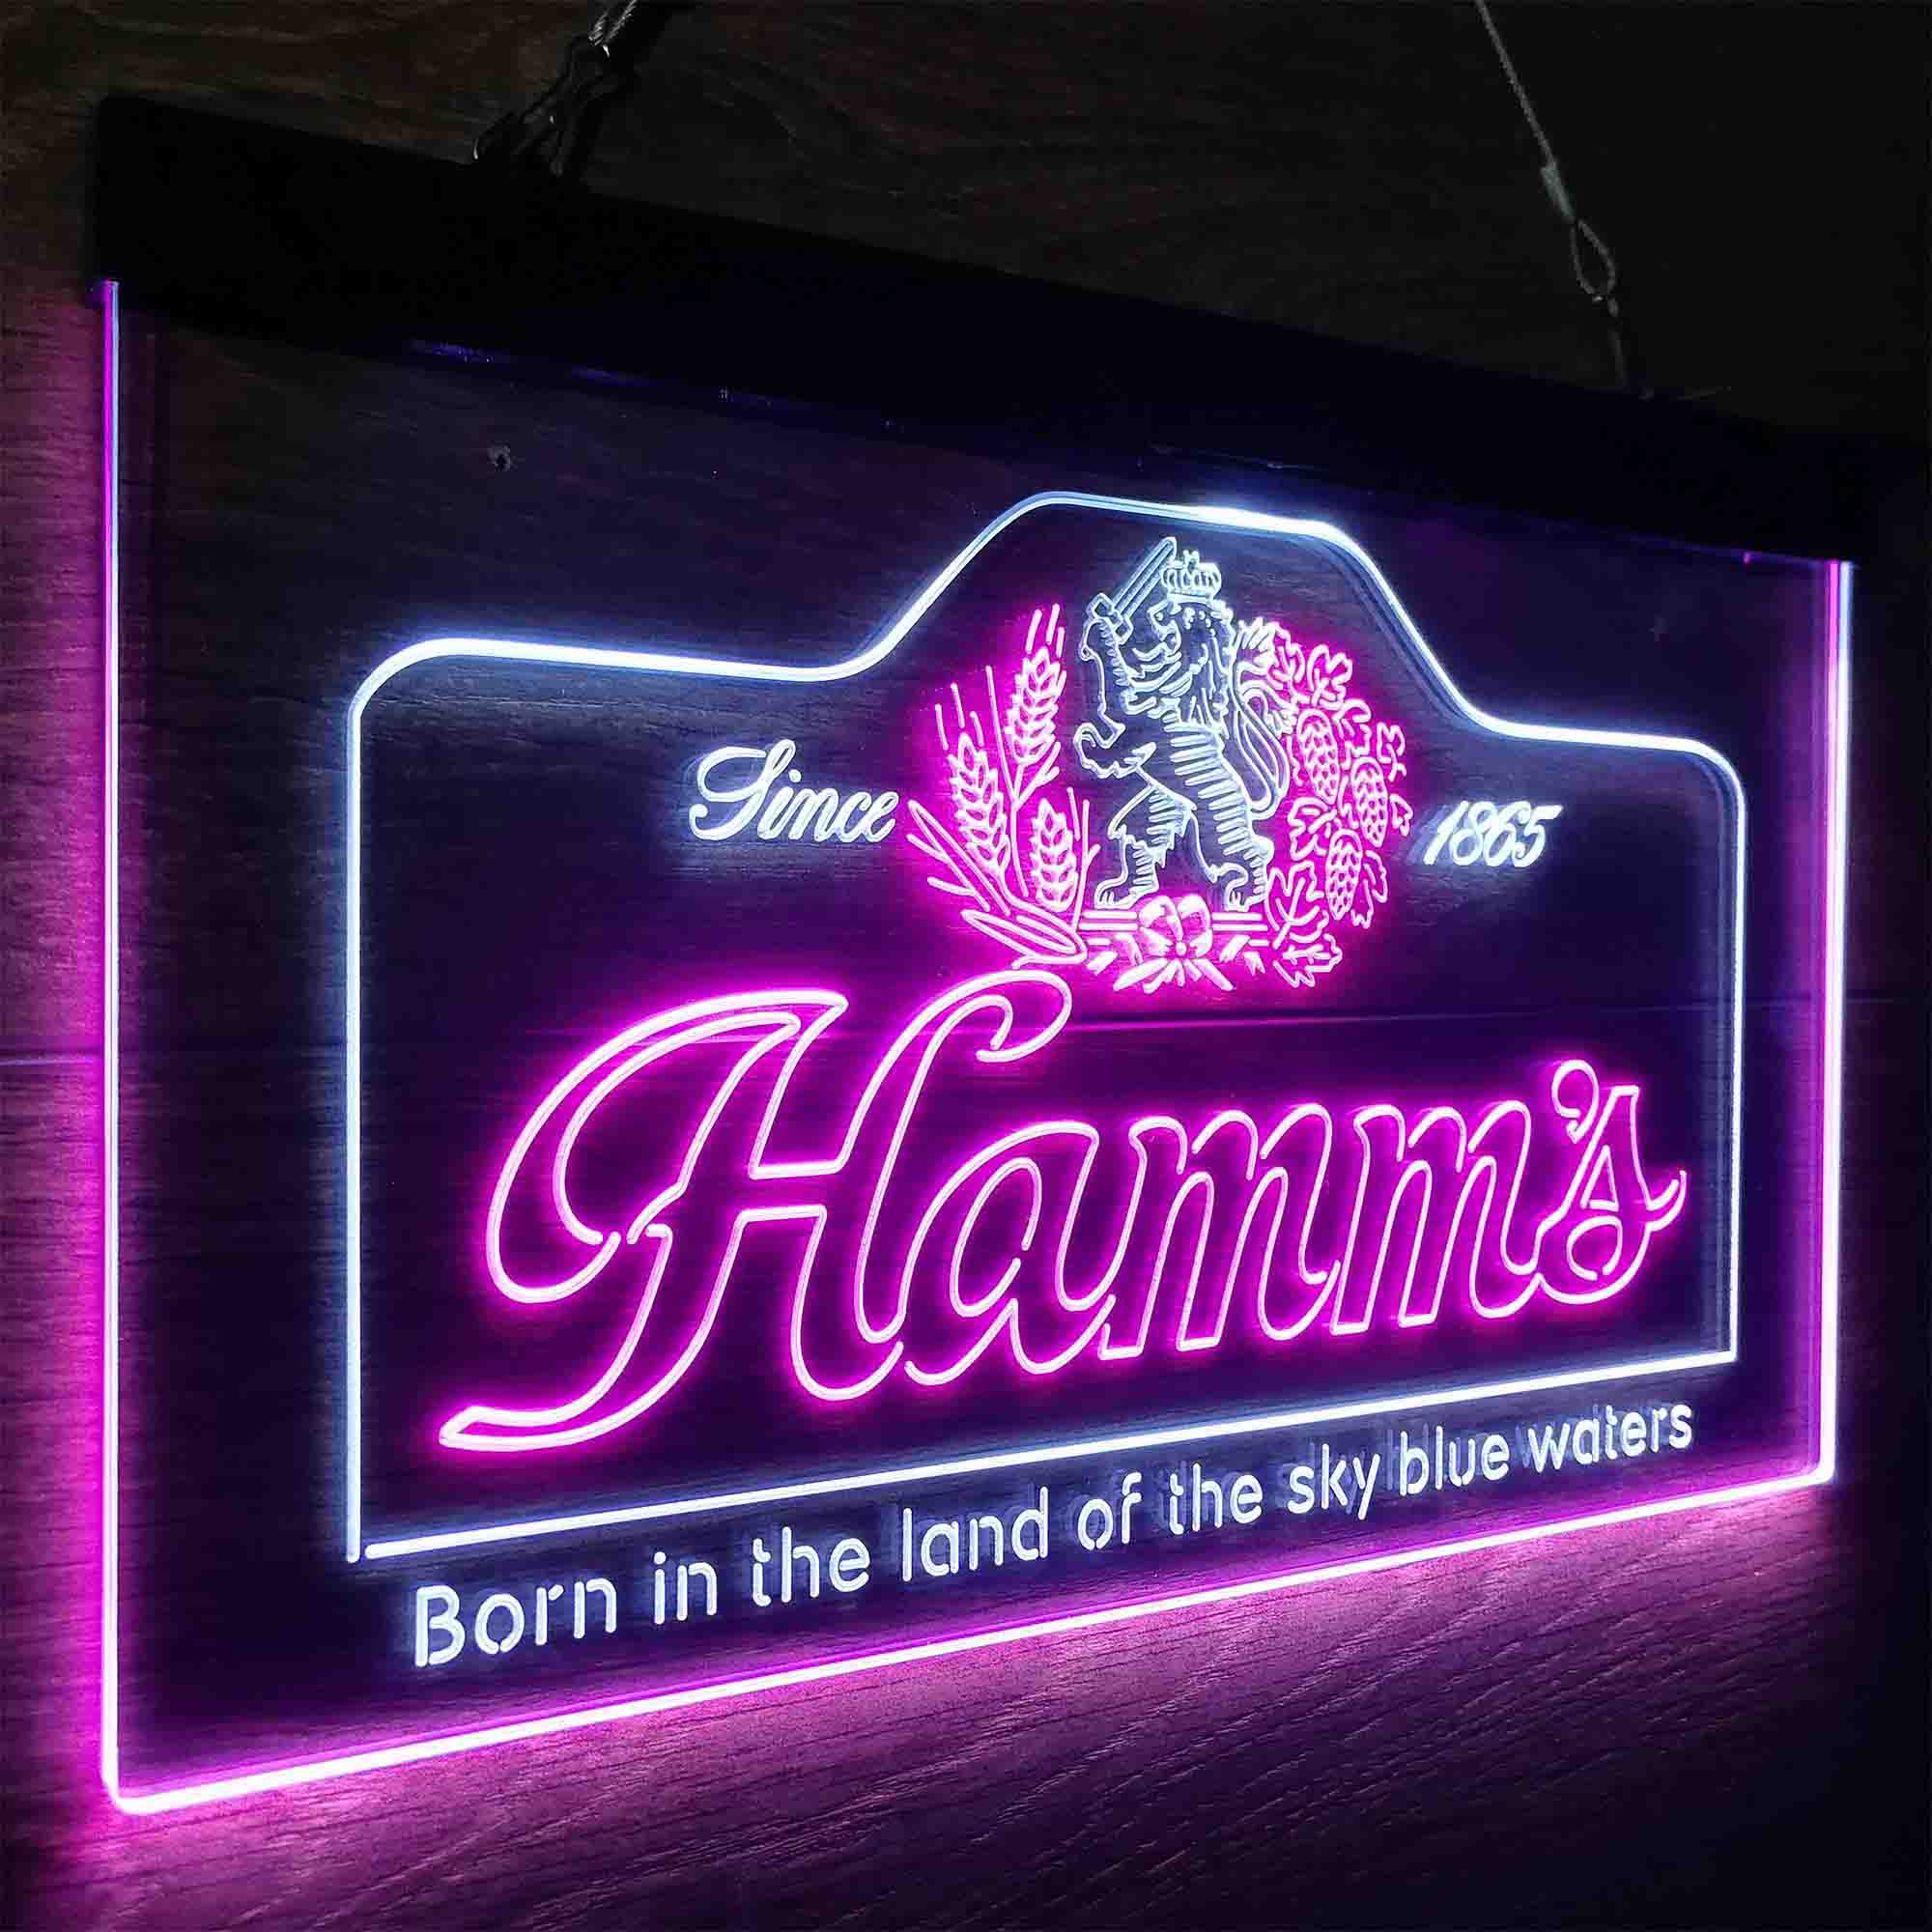 Hamm's Beer Since 1865 LED Neon Sign